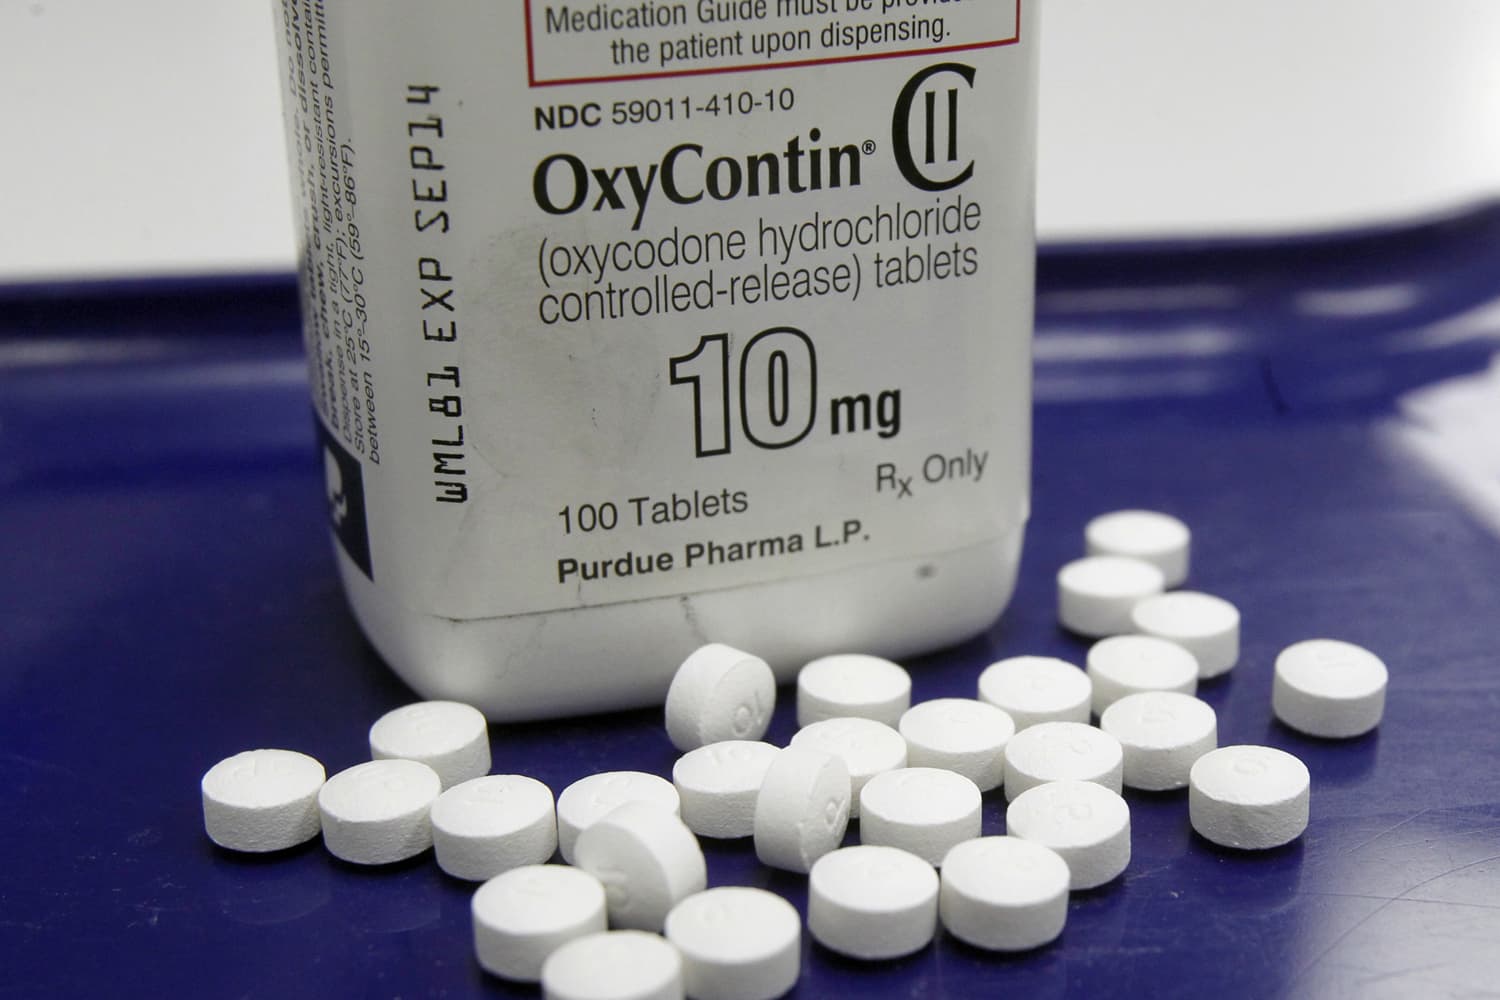 With an overdose epidemic worsening, nearly one-third of Medicare beneficiaries received at least one prescription for commonly abused opioids such as OxyContin and fentanyl in 2015. (Toby Talbot, File/AP)